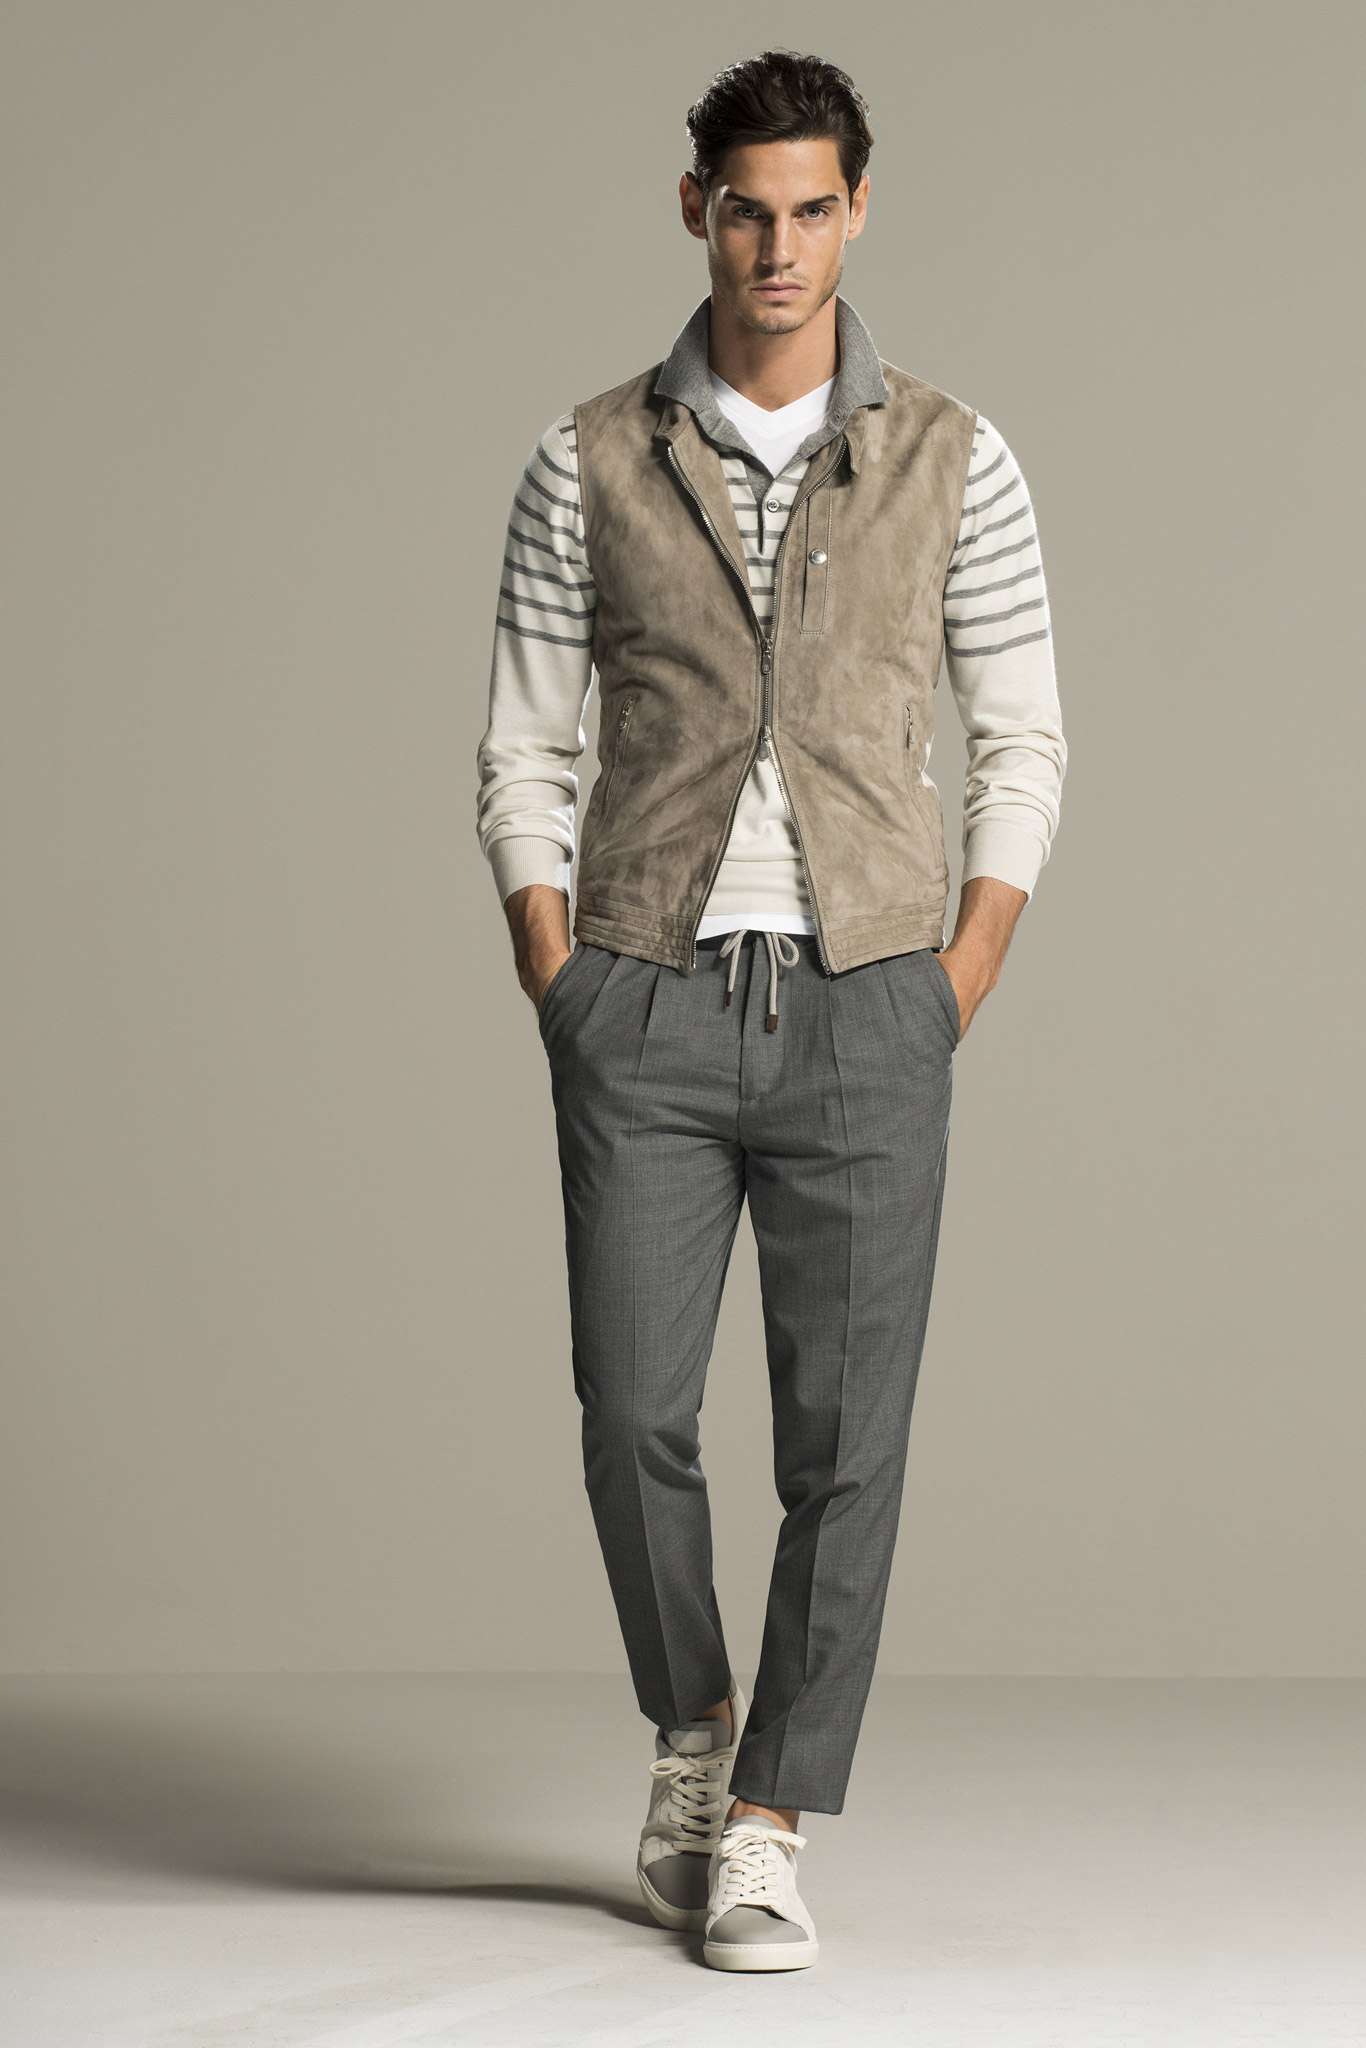 Brunello Cucinelli Spring/Summer 2016 Is Like Create-A-Dad